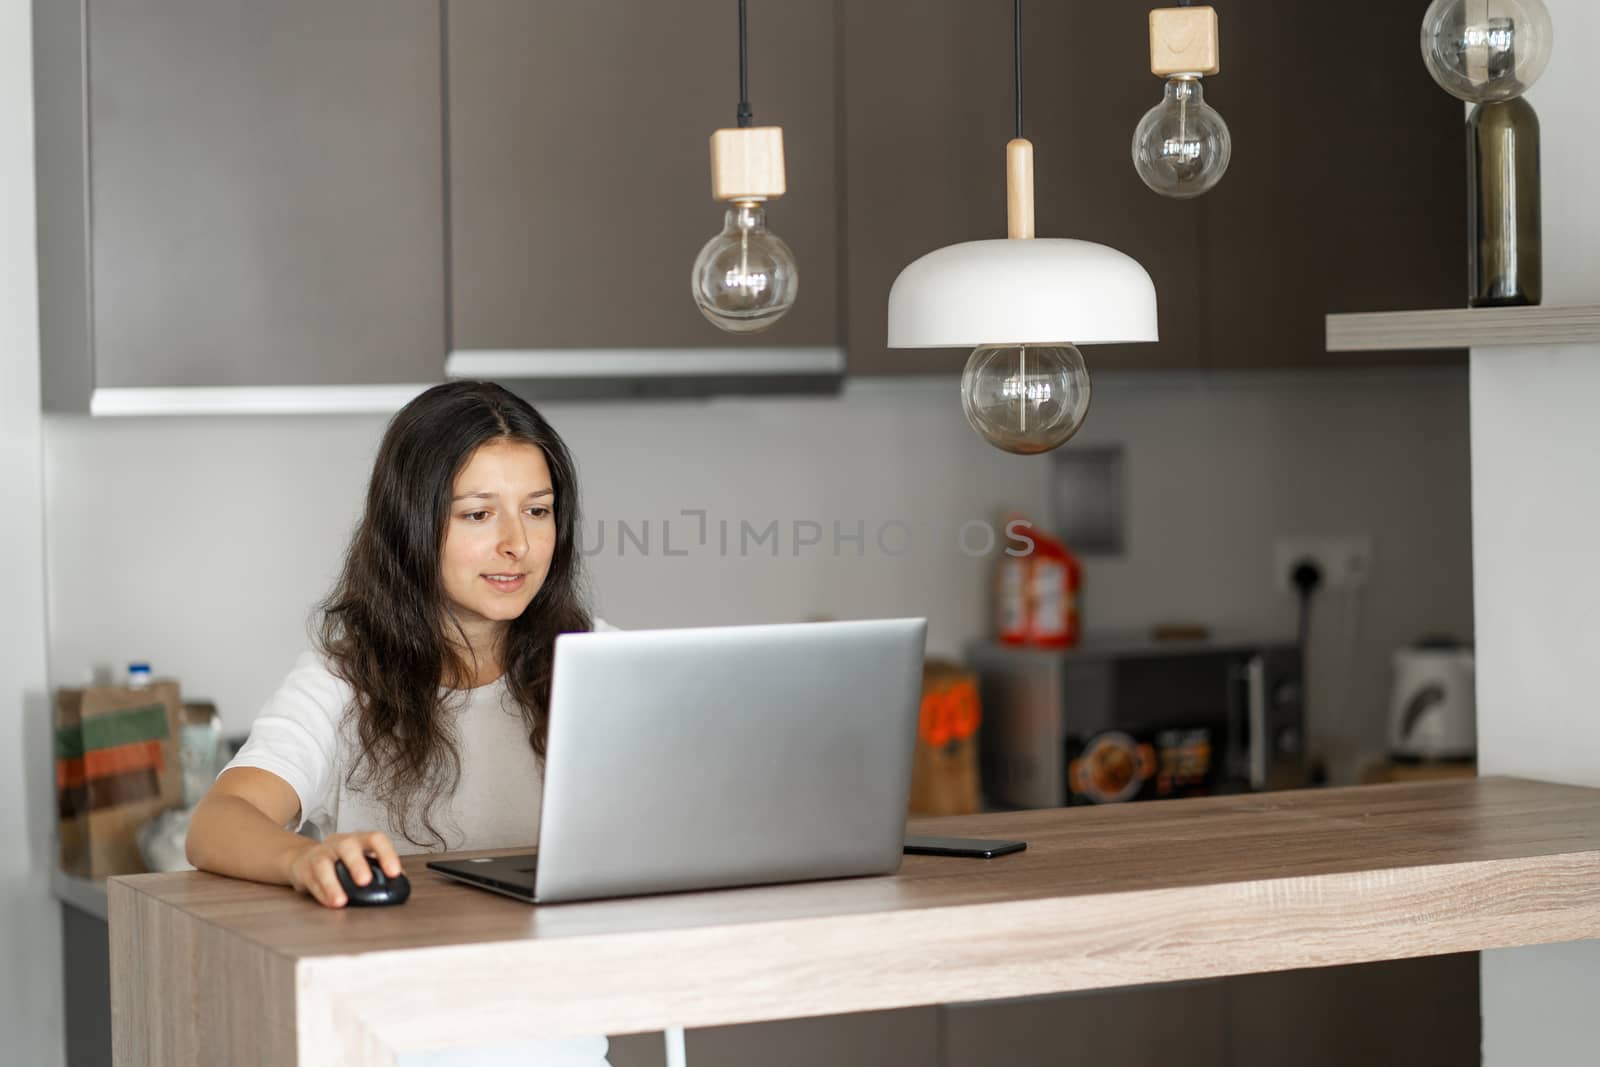 Beautiful young brunette girl working on a laptop at home in the kitchen